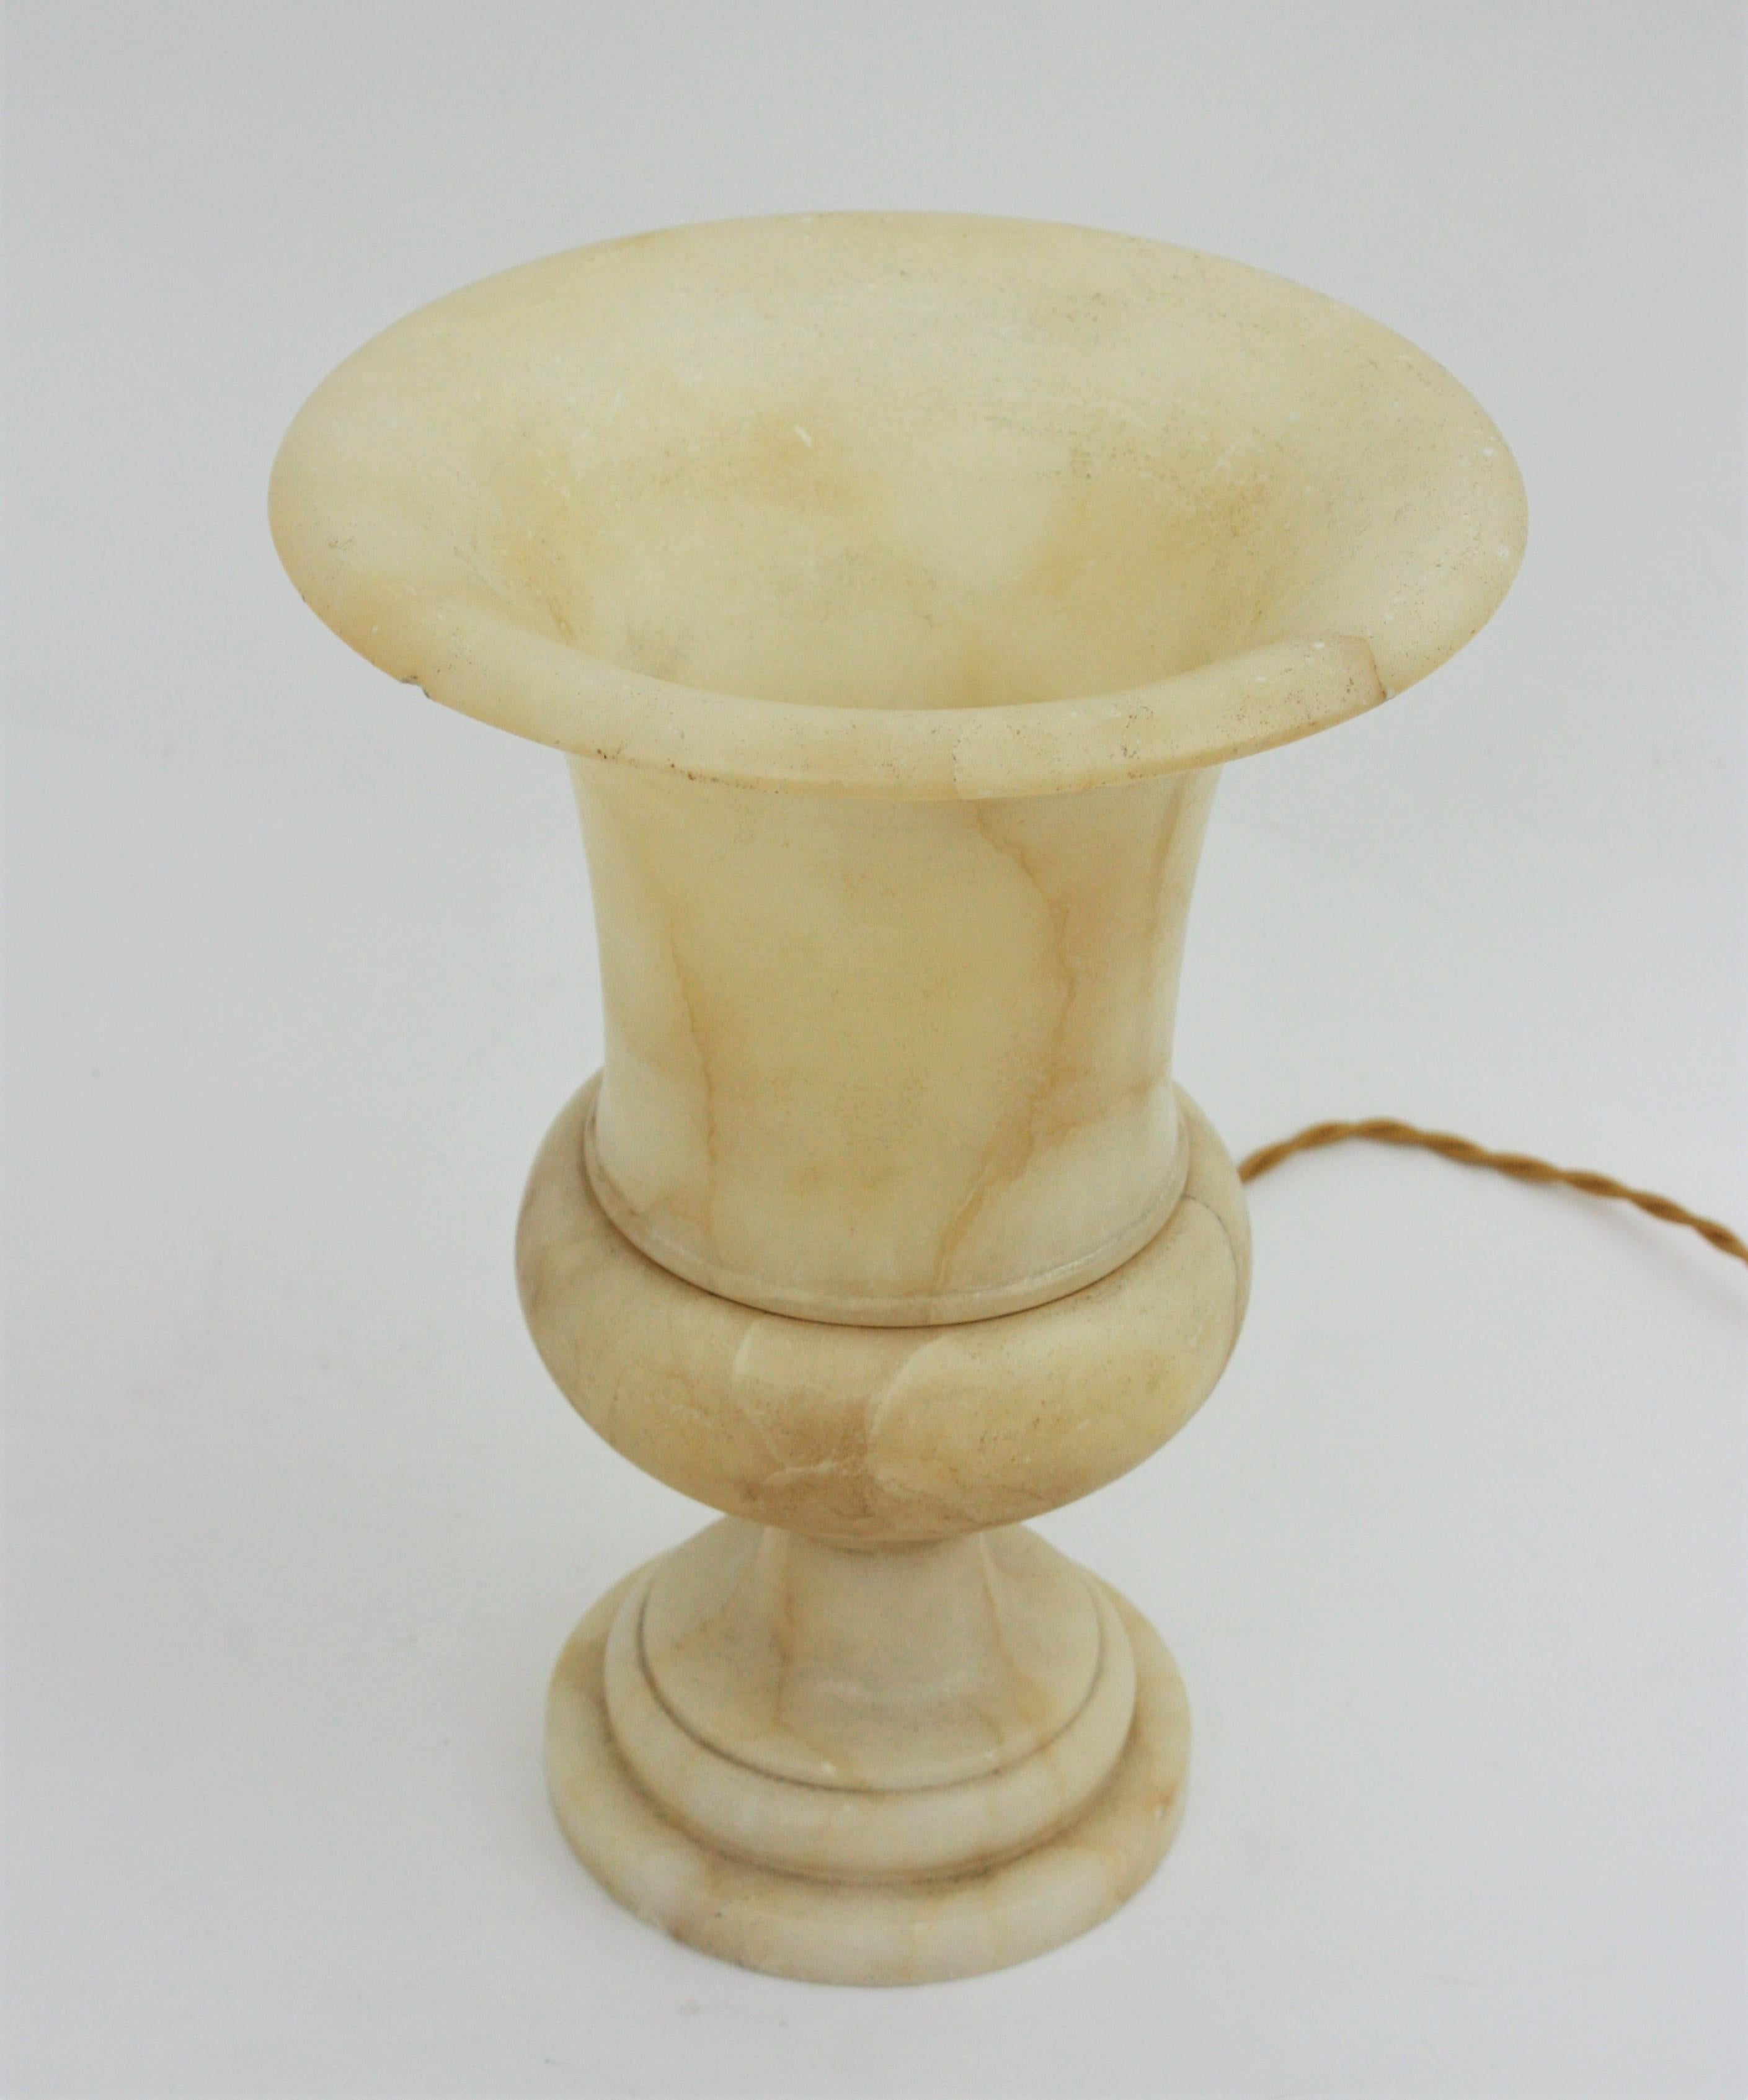 Carved Neoclassical Art Deco Alabaster Urn Lamp, Spain, 1930s